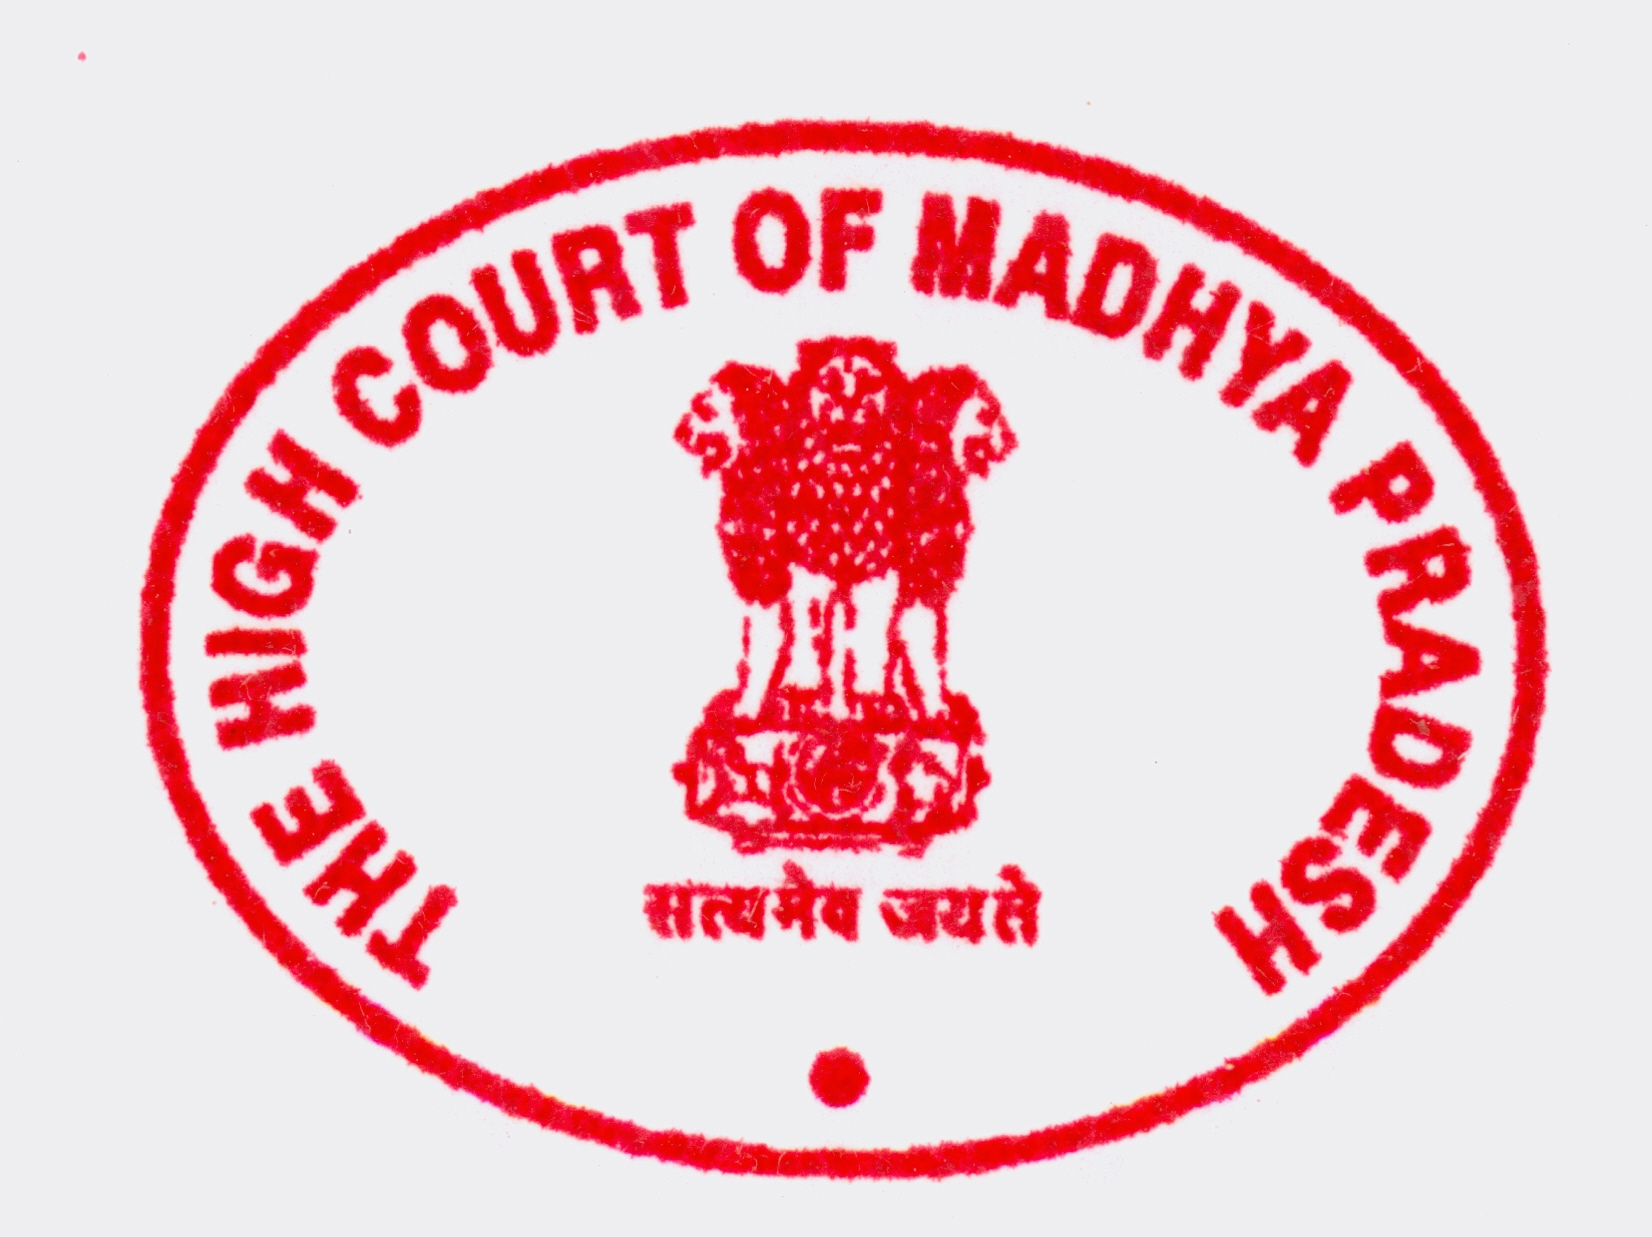 MP High Court Civil Judge Prelims Admit Card 2016 released for Download at www.mphc.gov.in